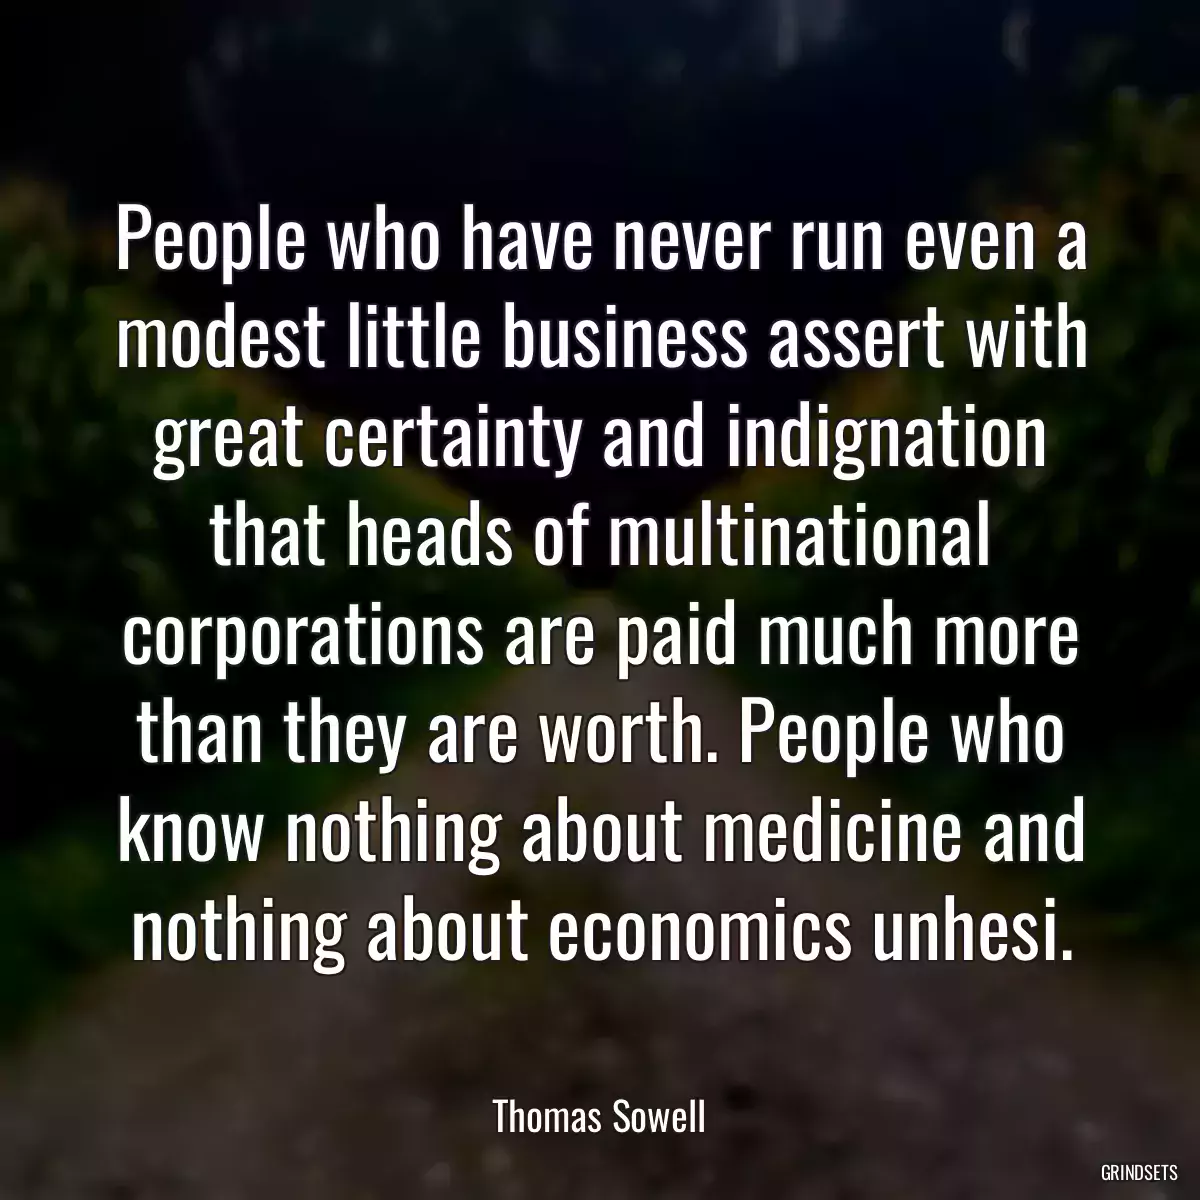 People who have never run even a modest little business assert with great certainty and indignation that heads of multinational corporations are paid much more than they are worth. People who know nothing about medicine and nothing about economics unhesi.